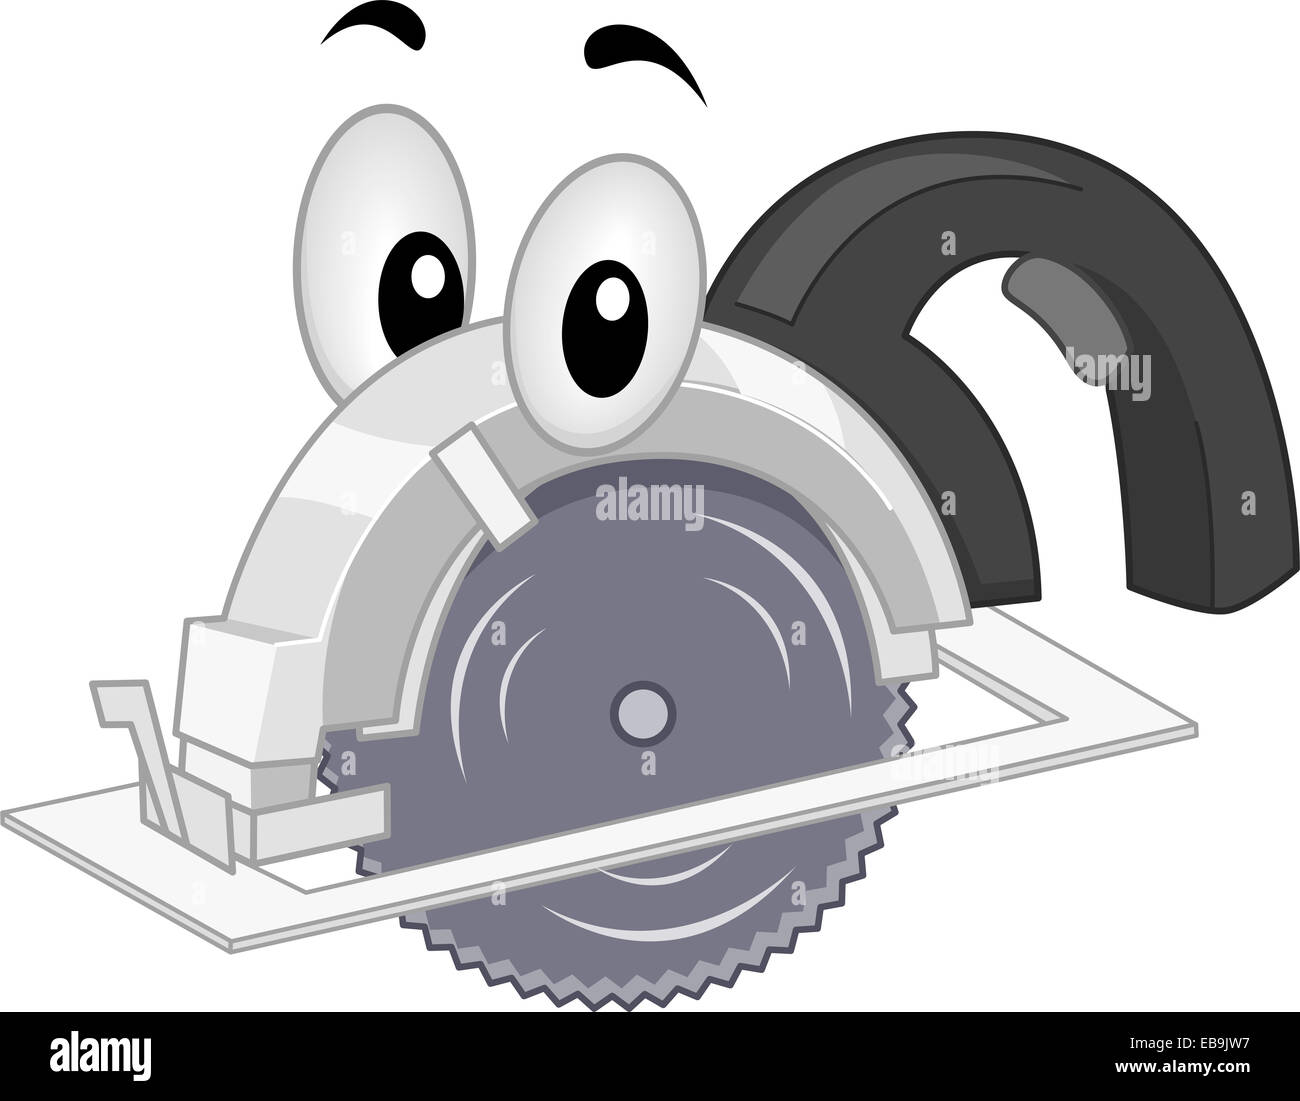 Mascot Illustration Featuring a Portable Saw Stock Photo